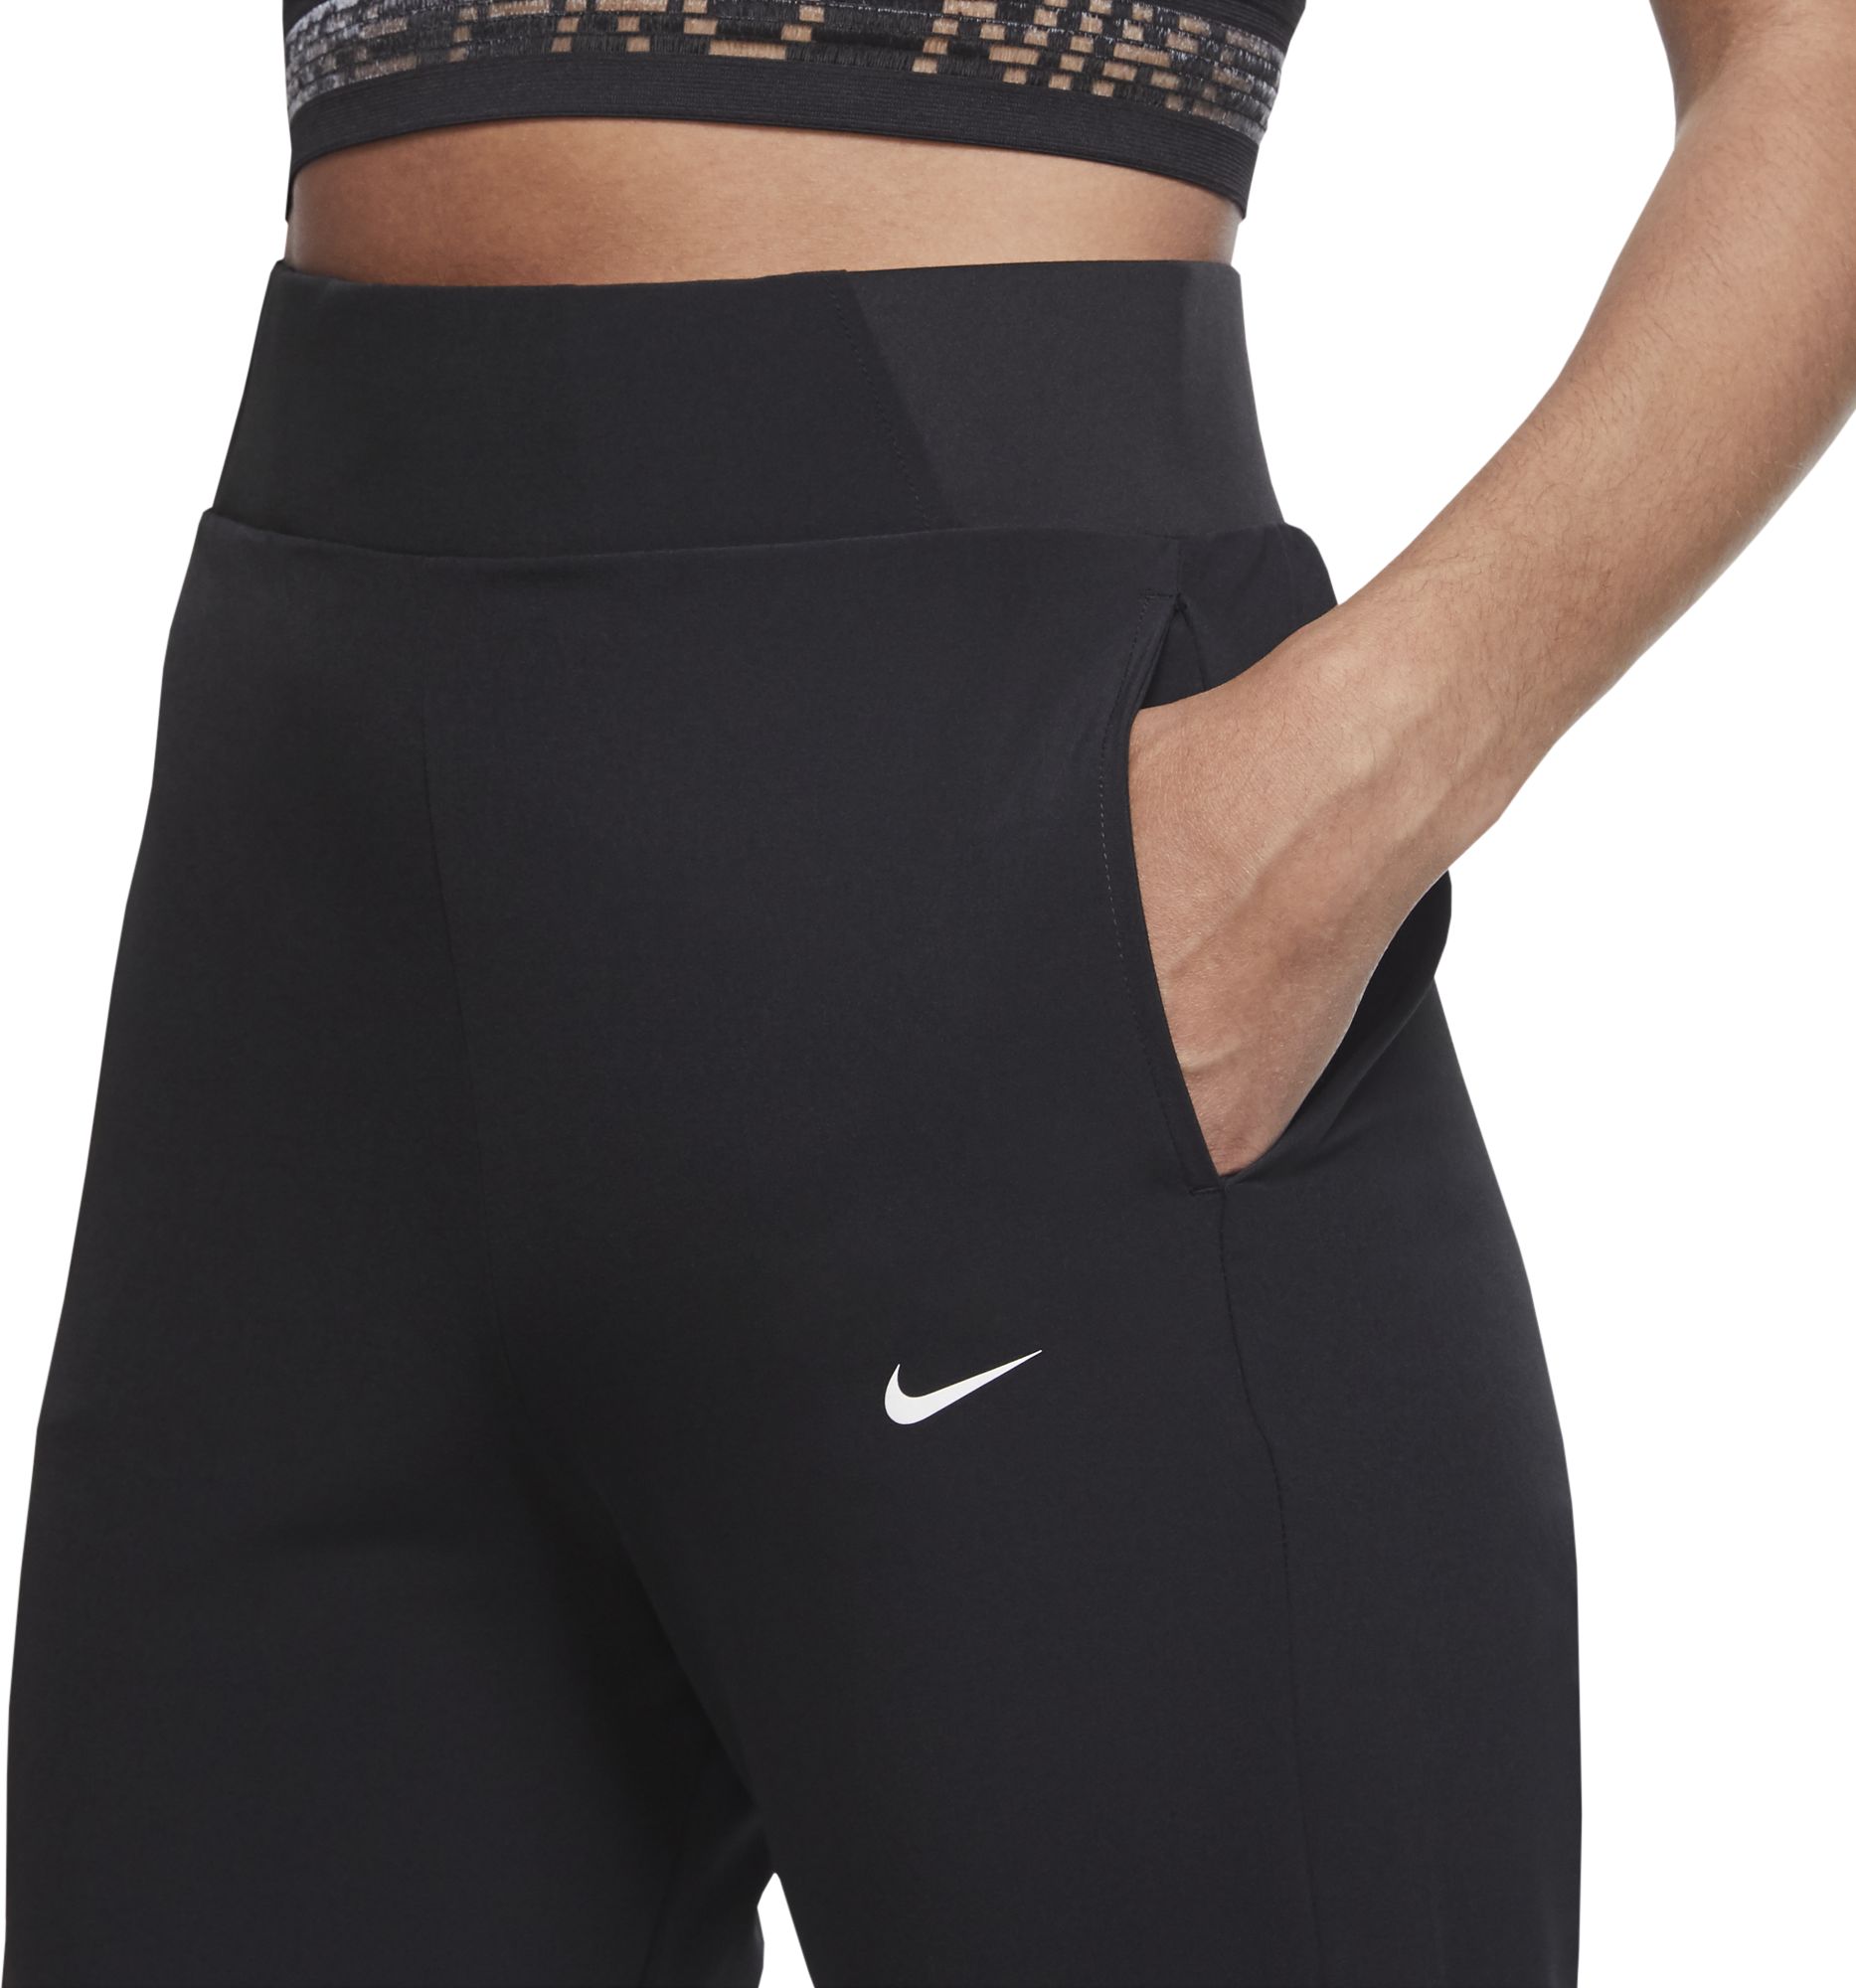 NIKE, W NK BLISS VCTRY PANT